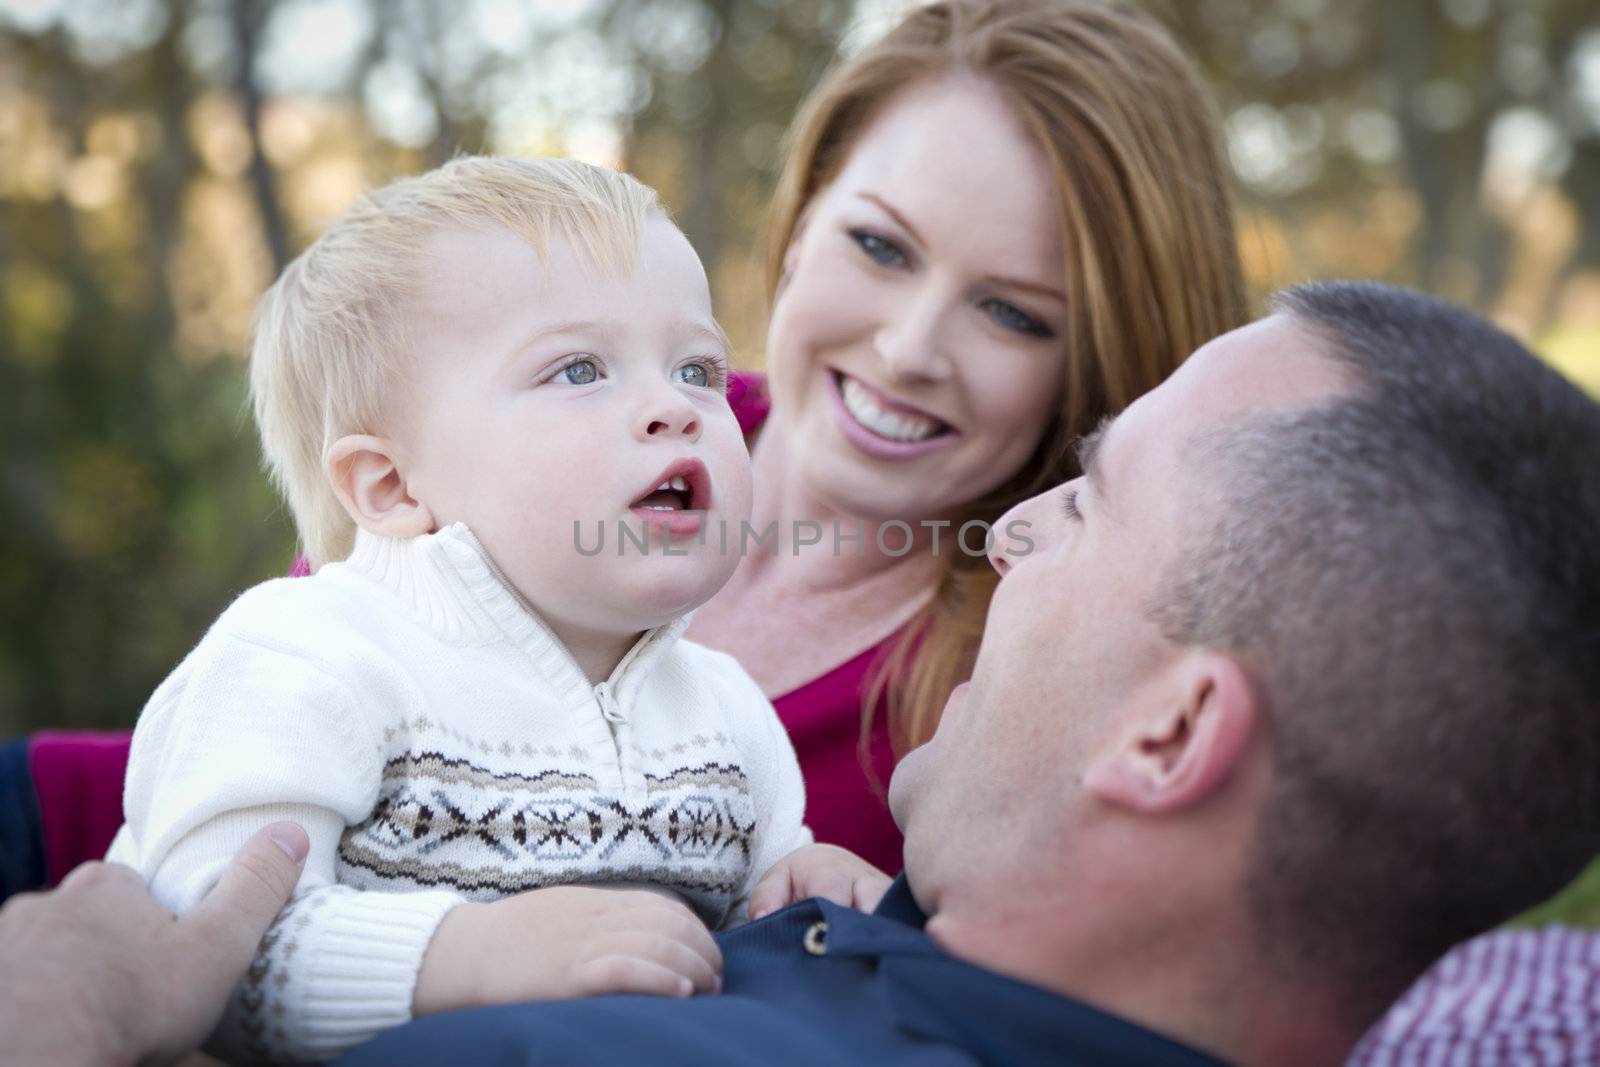 Cute Child Boy Looks Up to the Sky as Young Parents Smile.